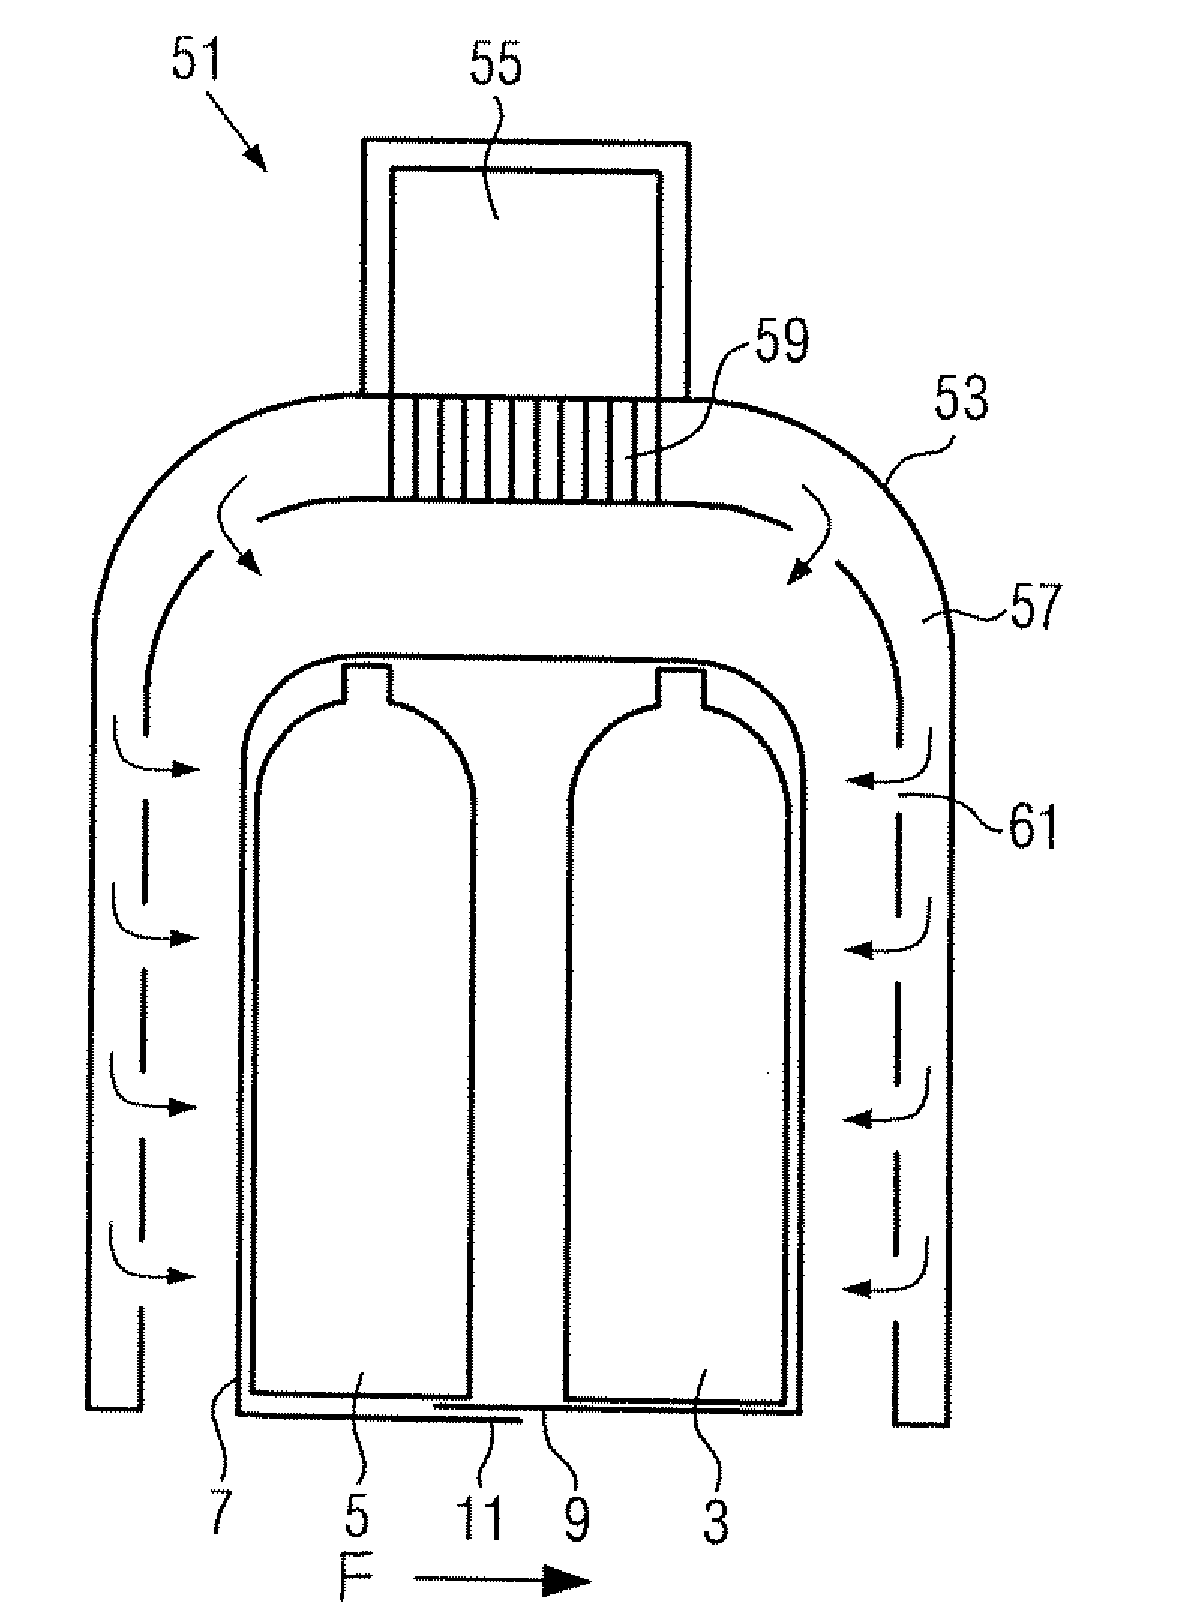 Machine and method for shrink-fitting of shrink wrap film onto packages